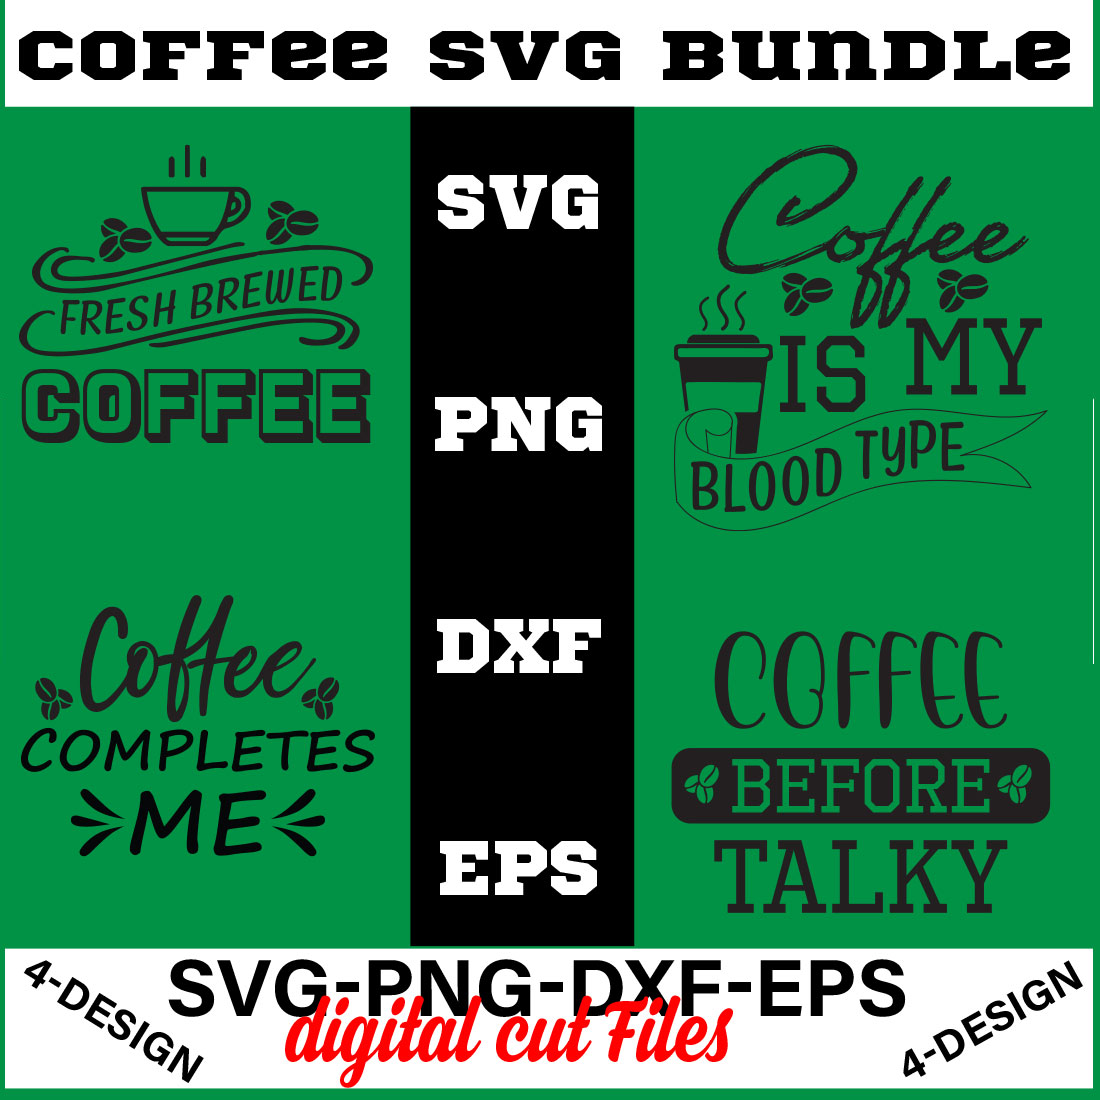 Coffee SVG Bundle, Funny Coffee SVG, Coffee Quote Svg, Caffeine Queen, Coffee Lovers, Coffee Obsessed Volume-11 cover image.